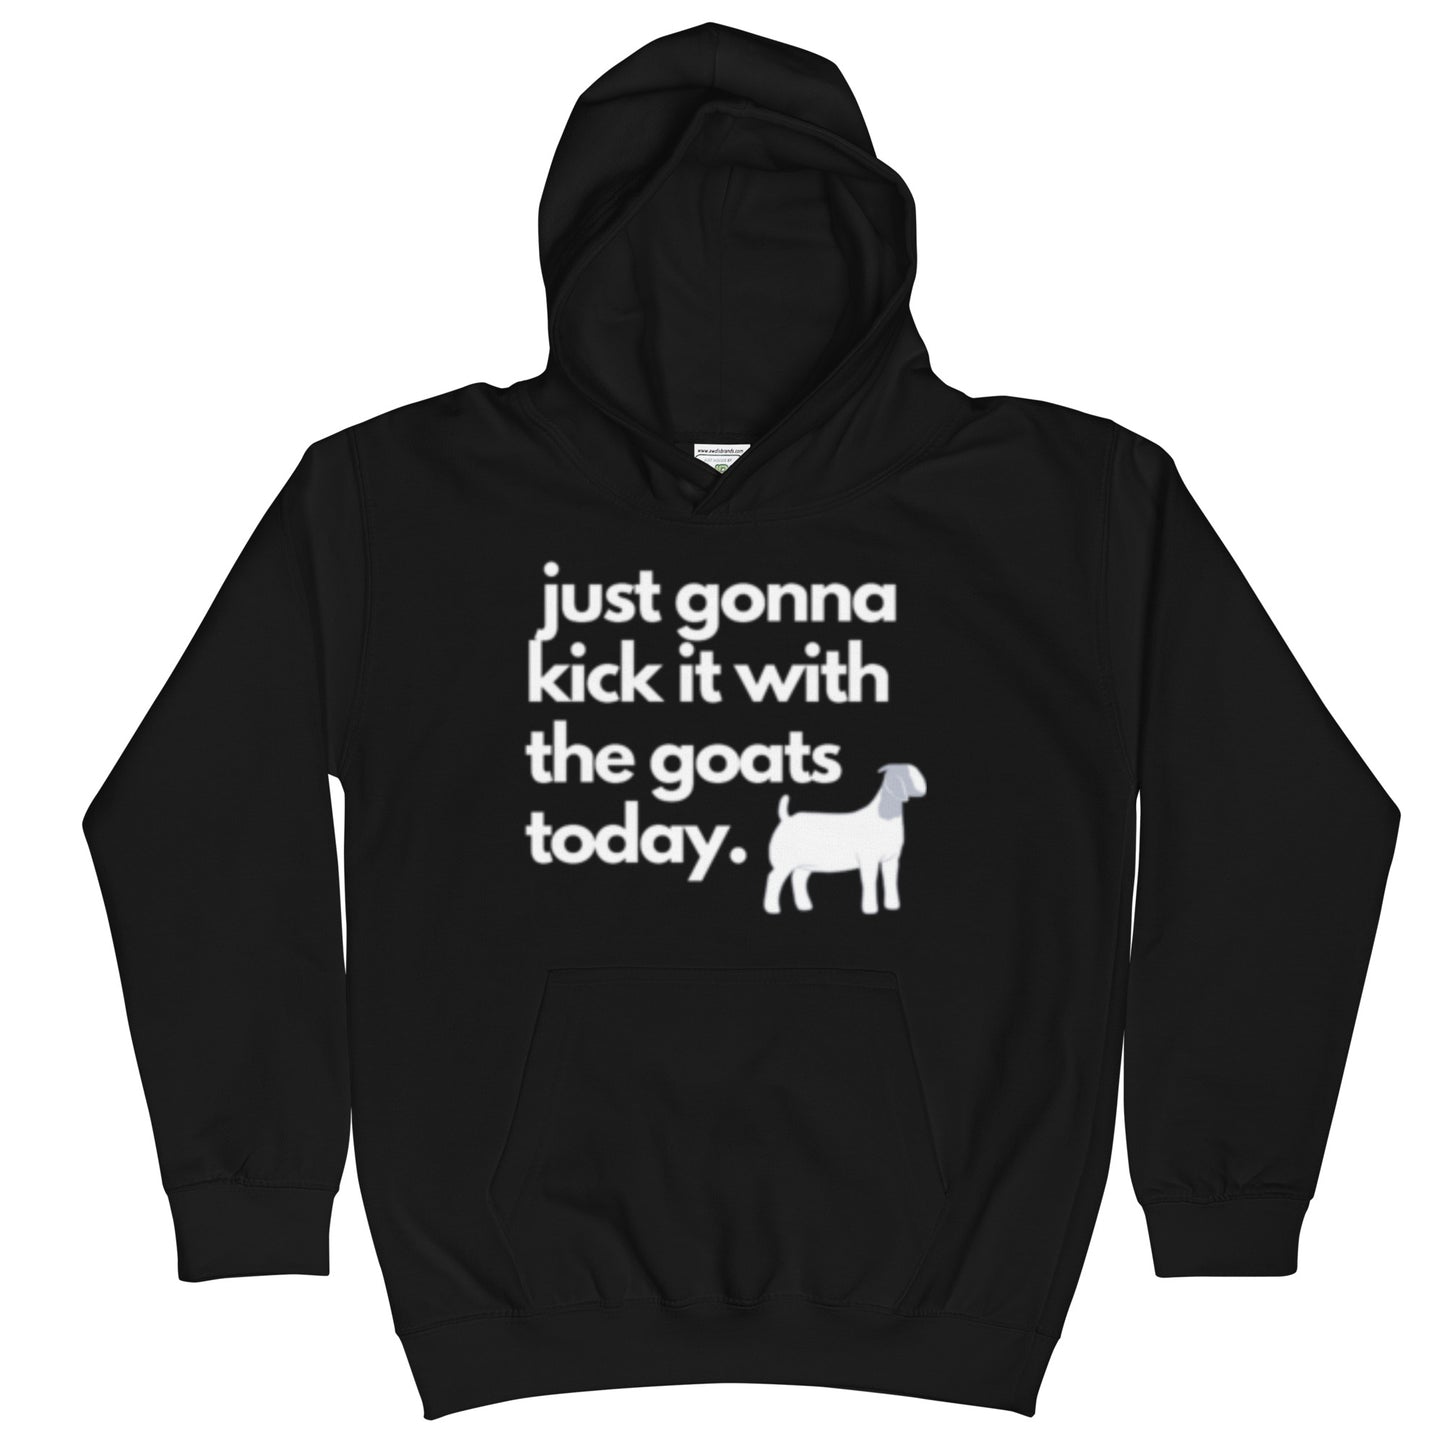 YOUTH HOODIE- KICK IT WITH THE GOATS